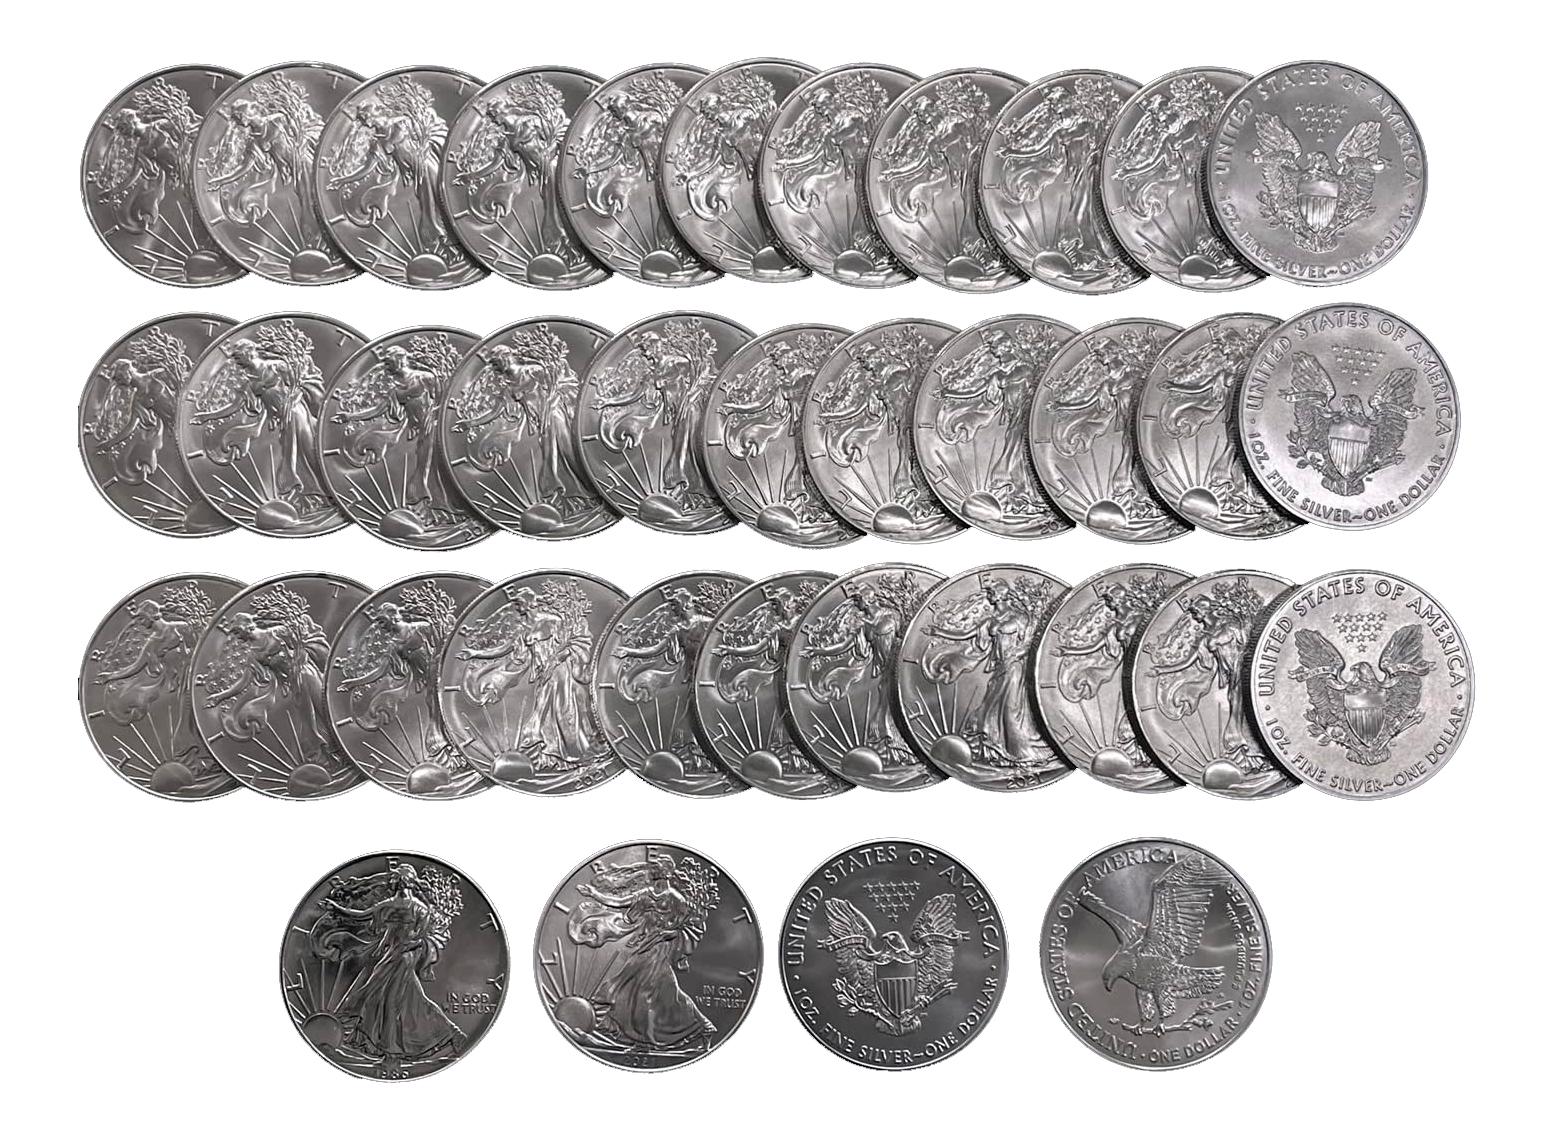 Silver Eagle Complete Set of BU American Silver Eagle Dollars 1986 to 2022 Includes Type 1 and Type 2 from 2021